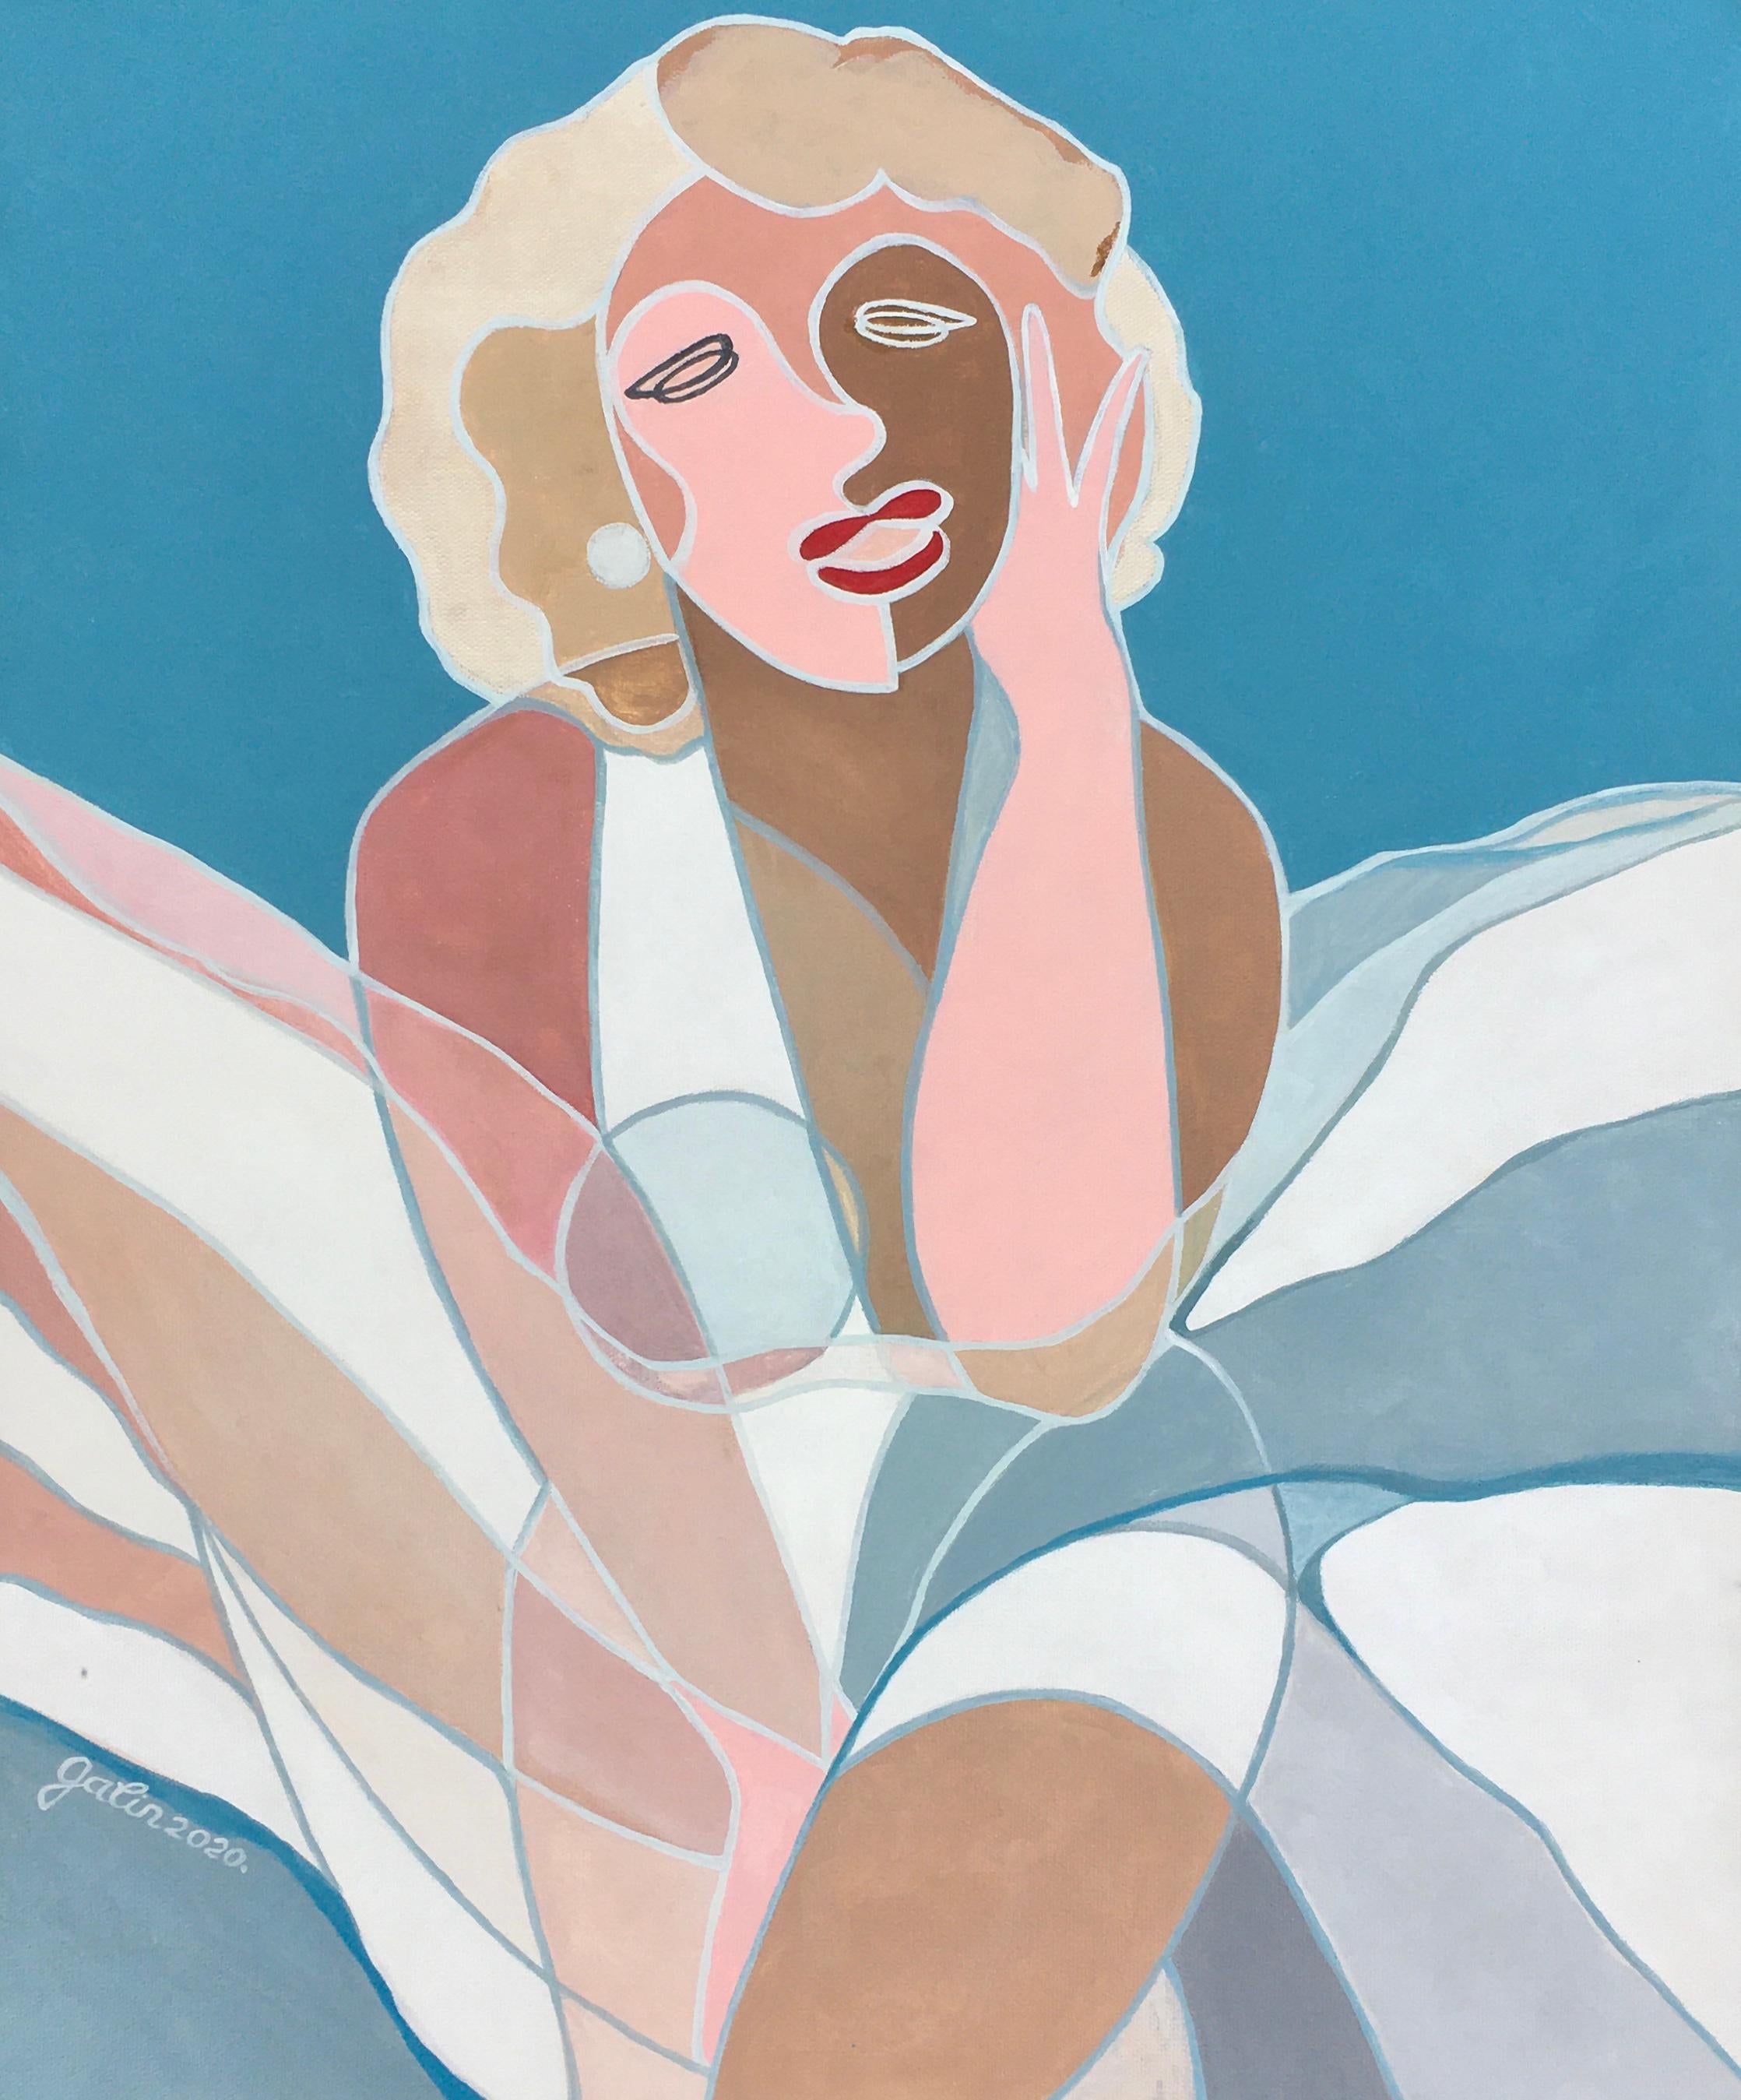 Marilyn Monroe (Gone with the wind) -abstract girl made in turquoise, blue, pink